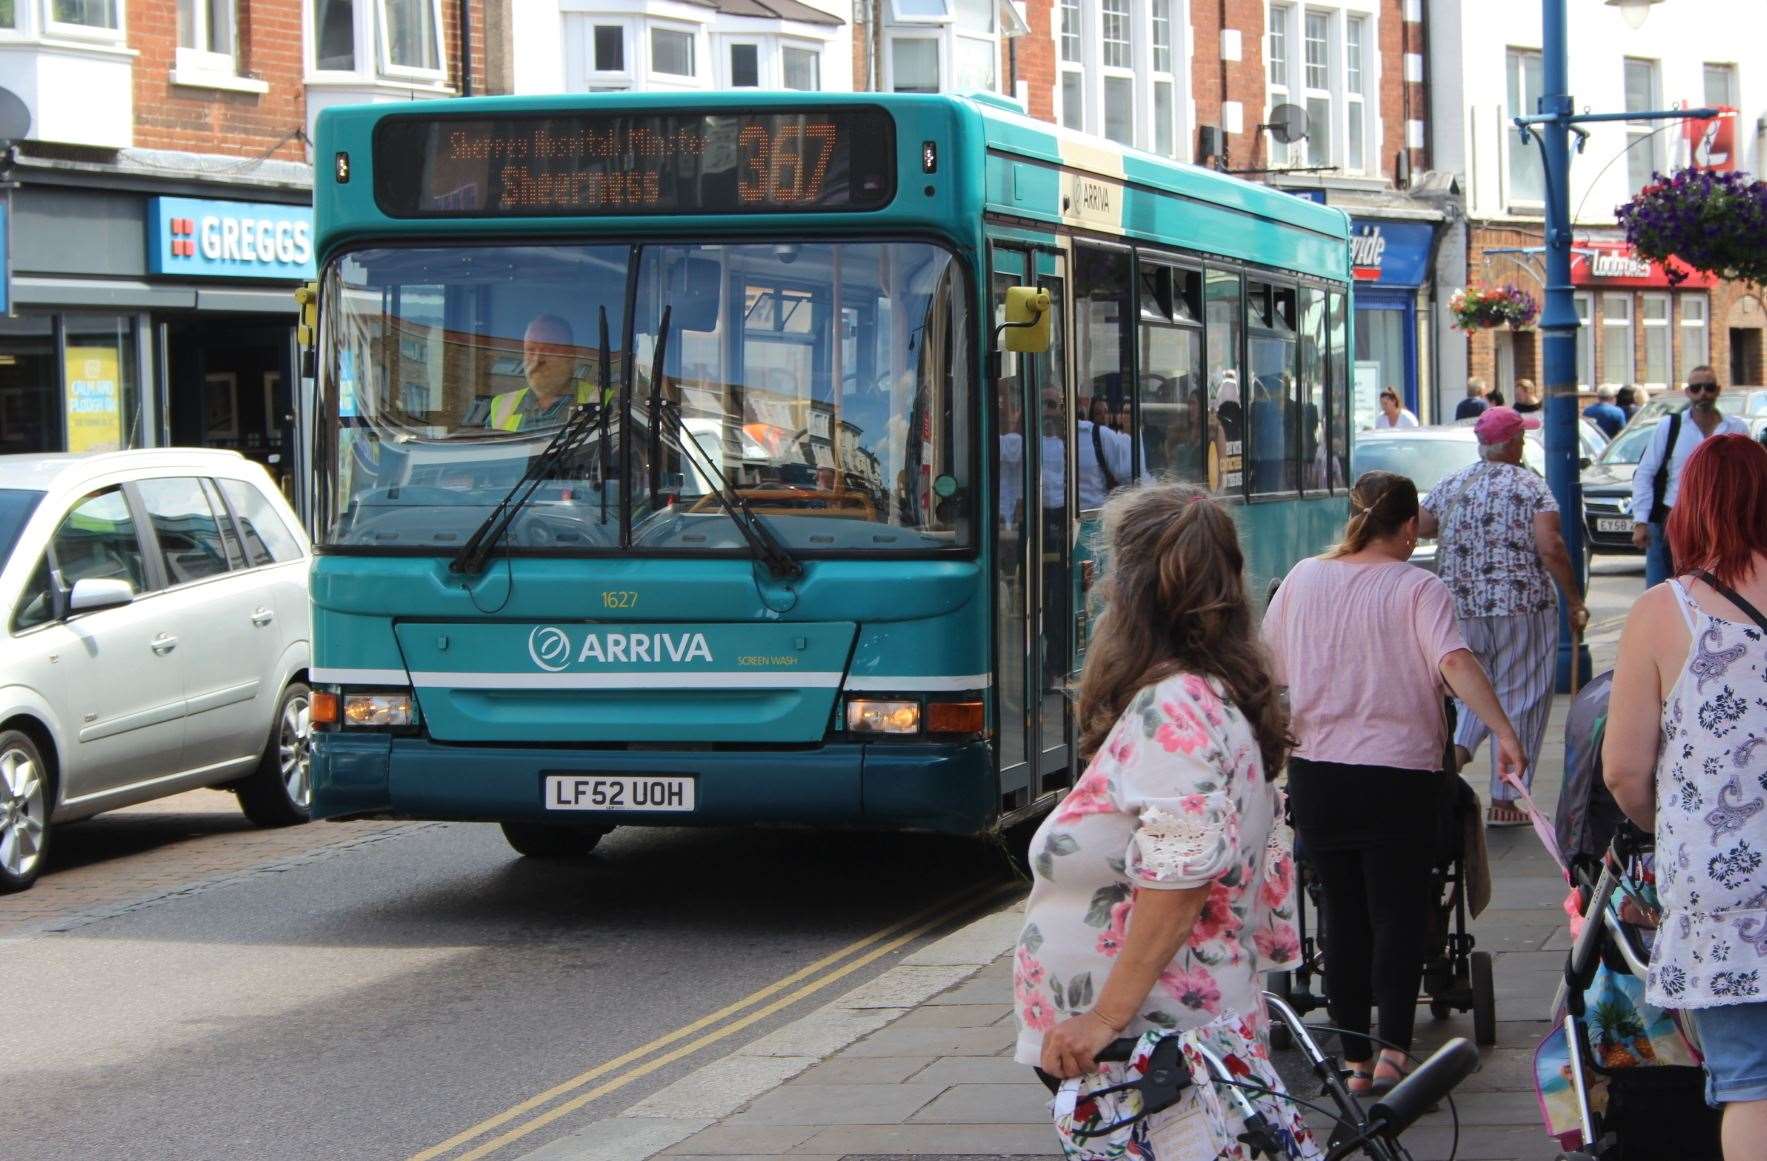 Arriva bus in Sheerness High Street (26649434)